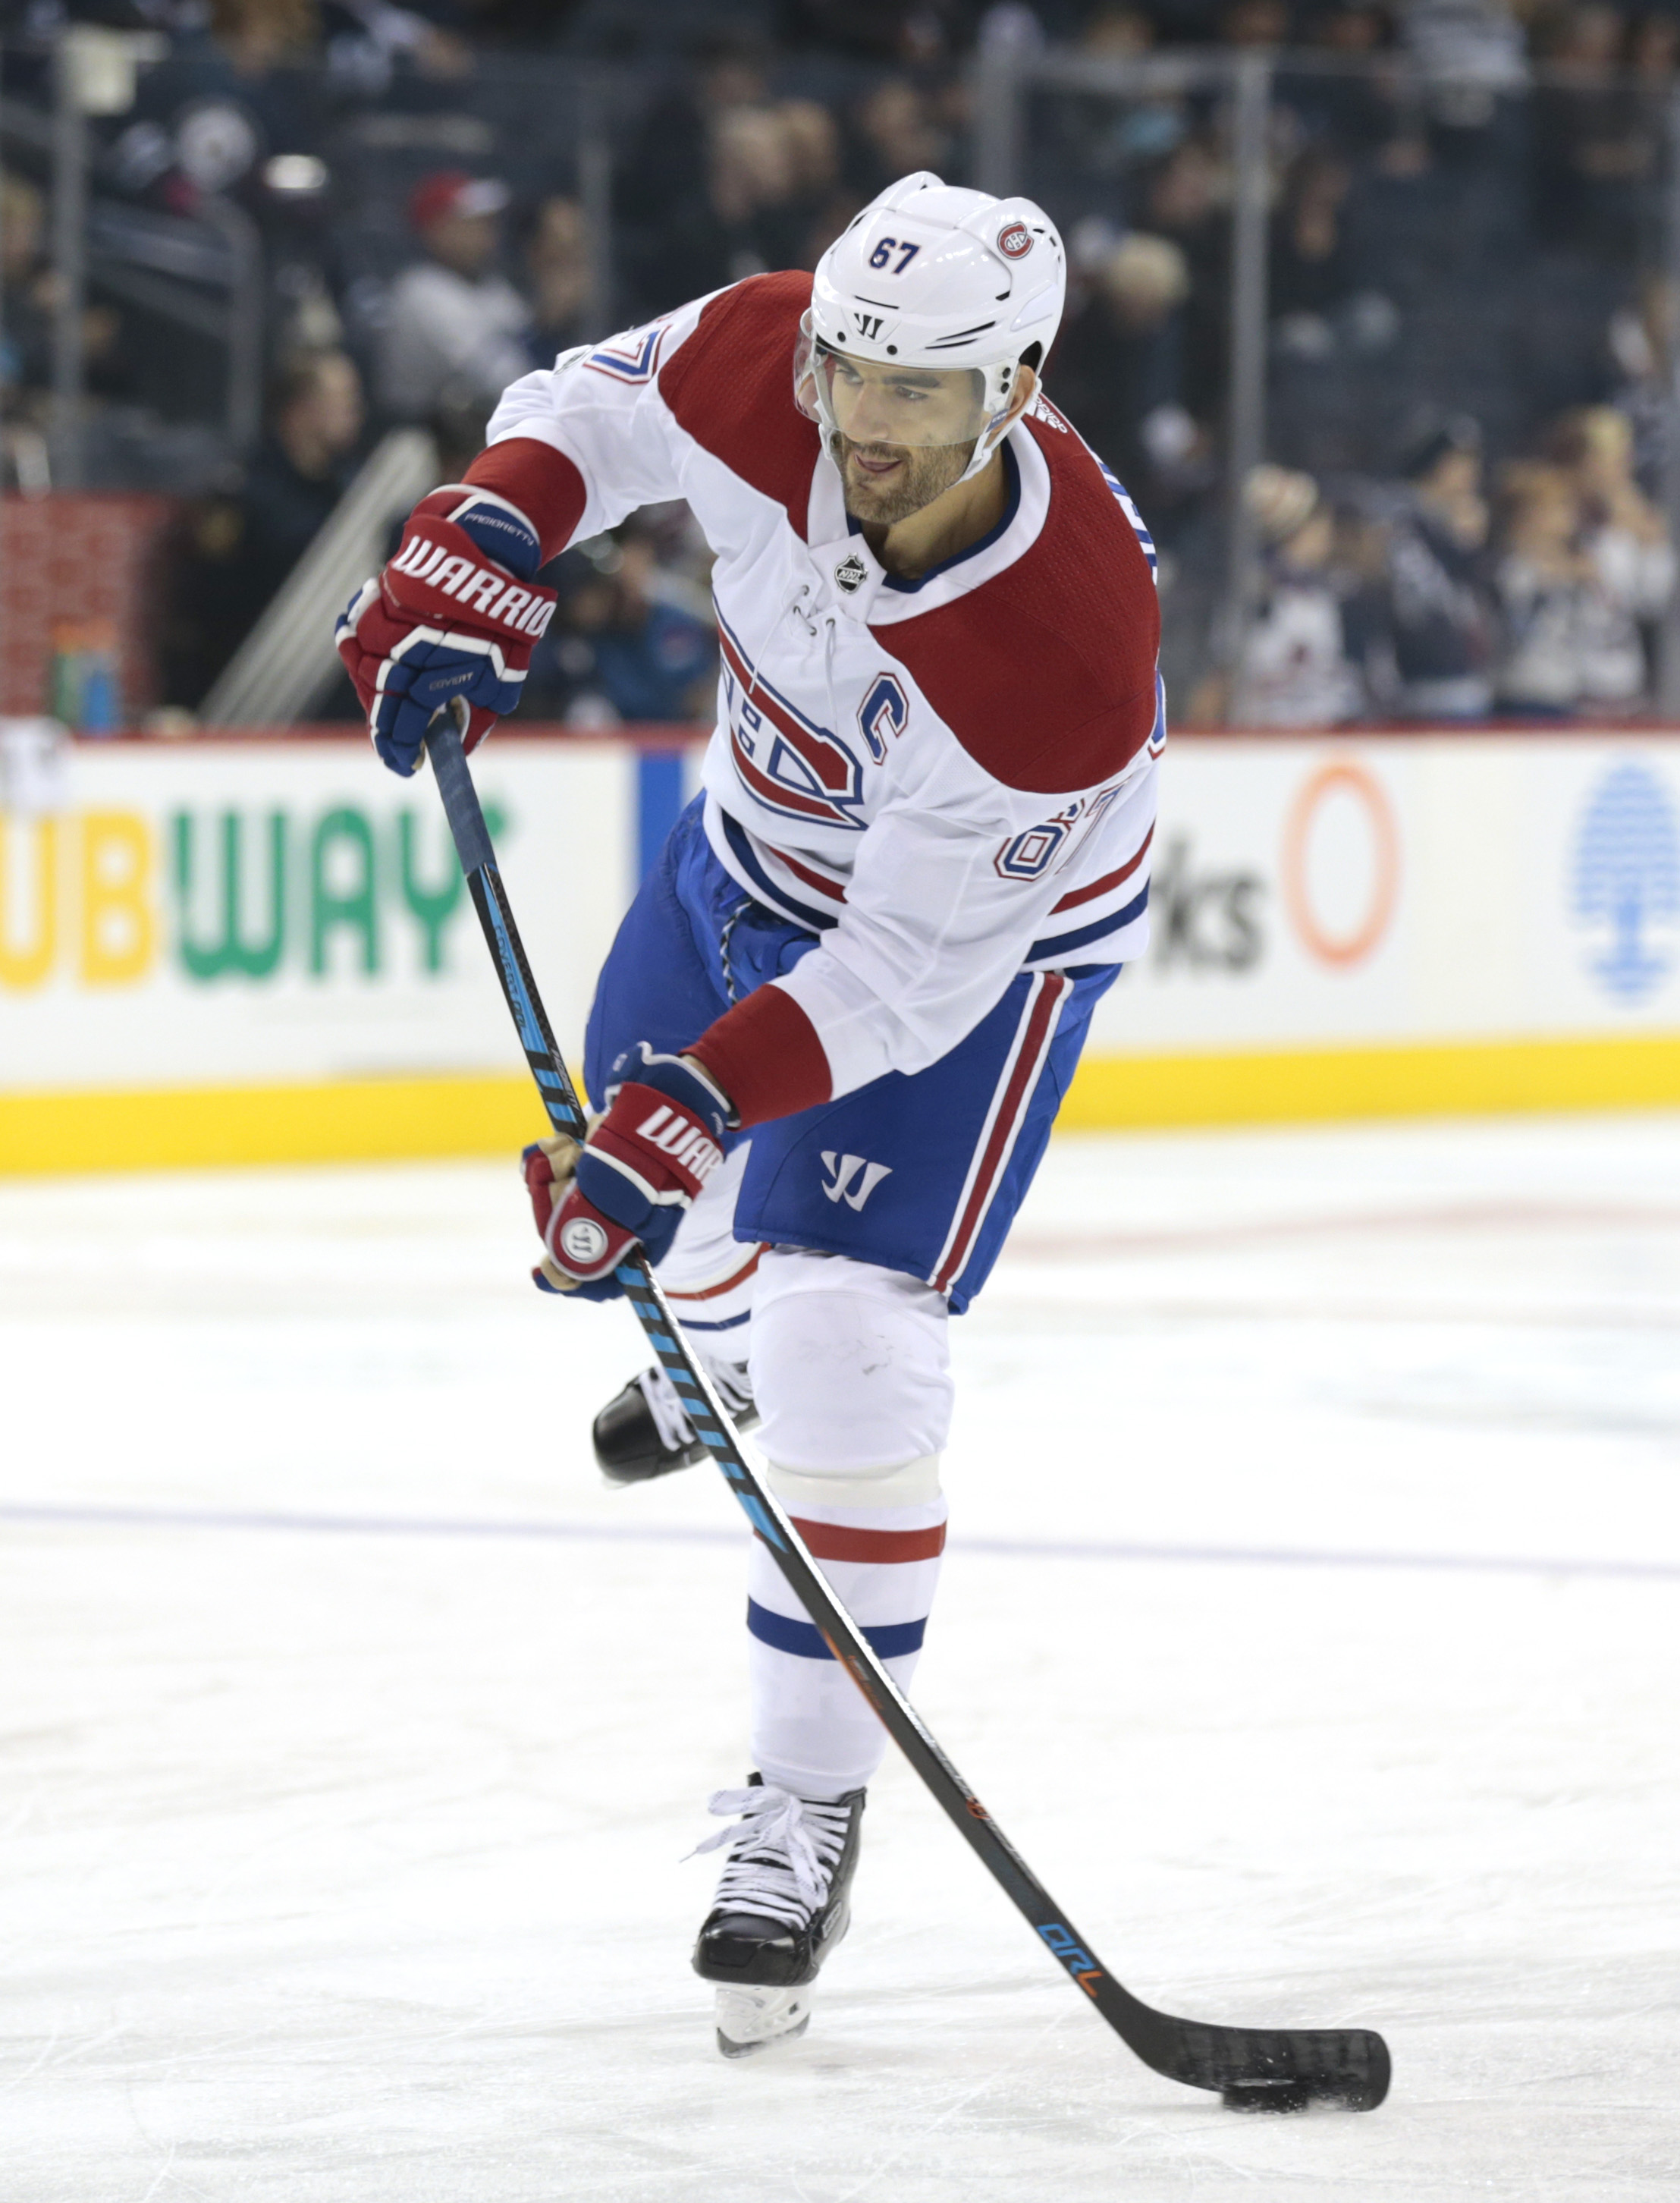 Max Pacioretty: 'The most fun I've ever had playing hockey' - The